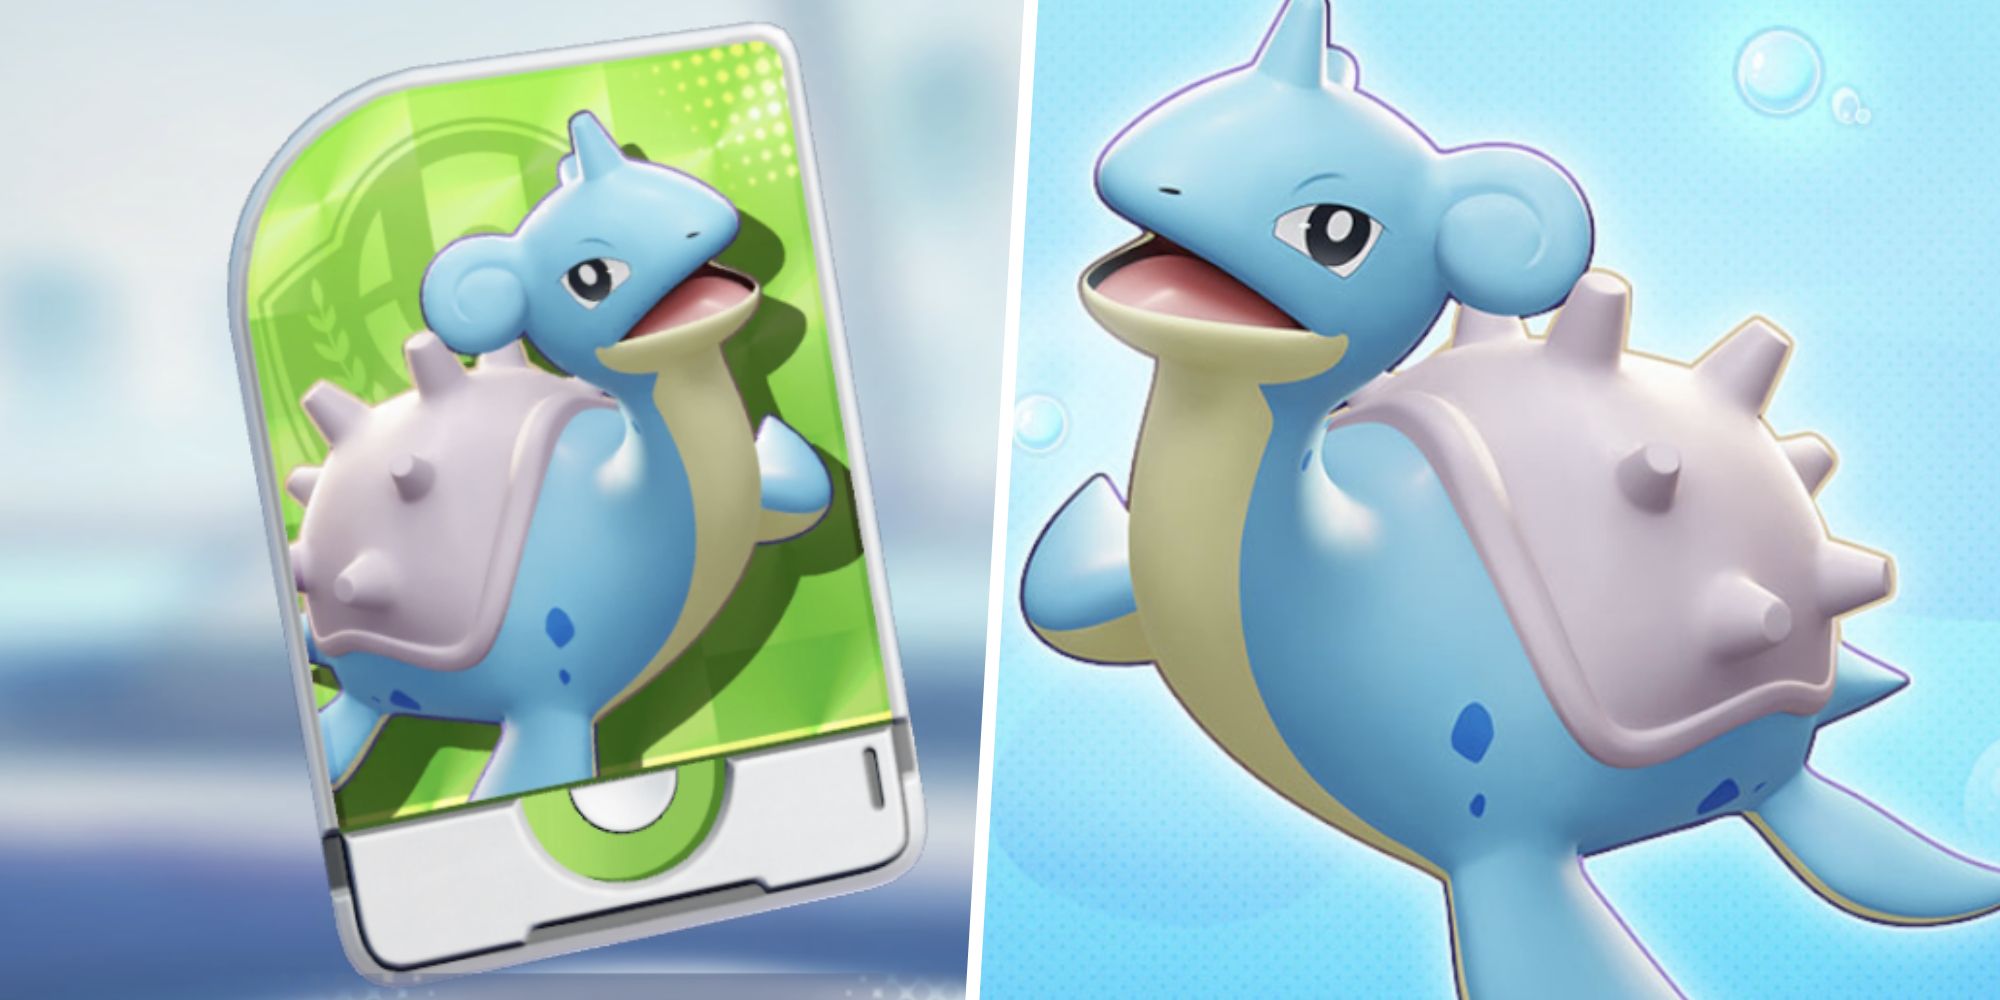 Image of the Lapras Unite License split with an image of Lapras from Pokemon